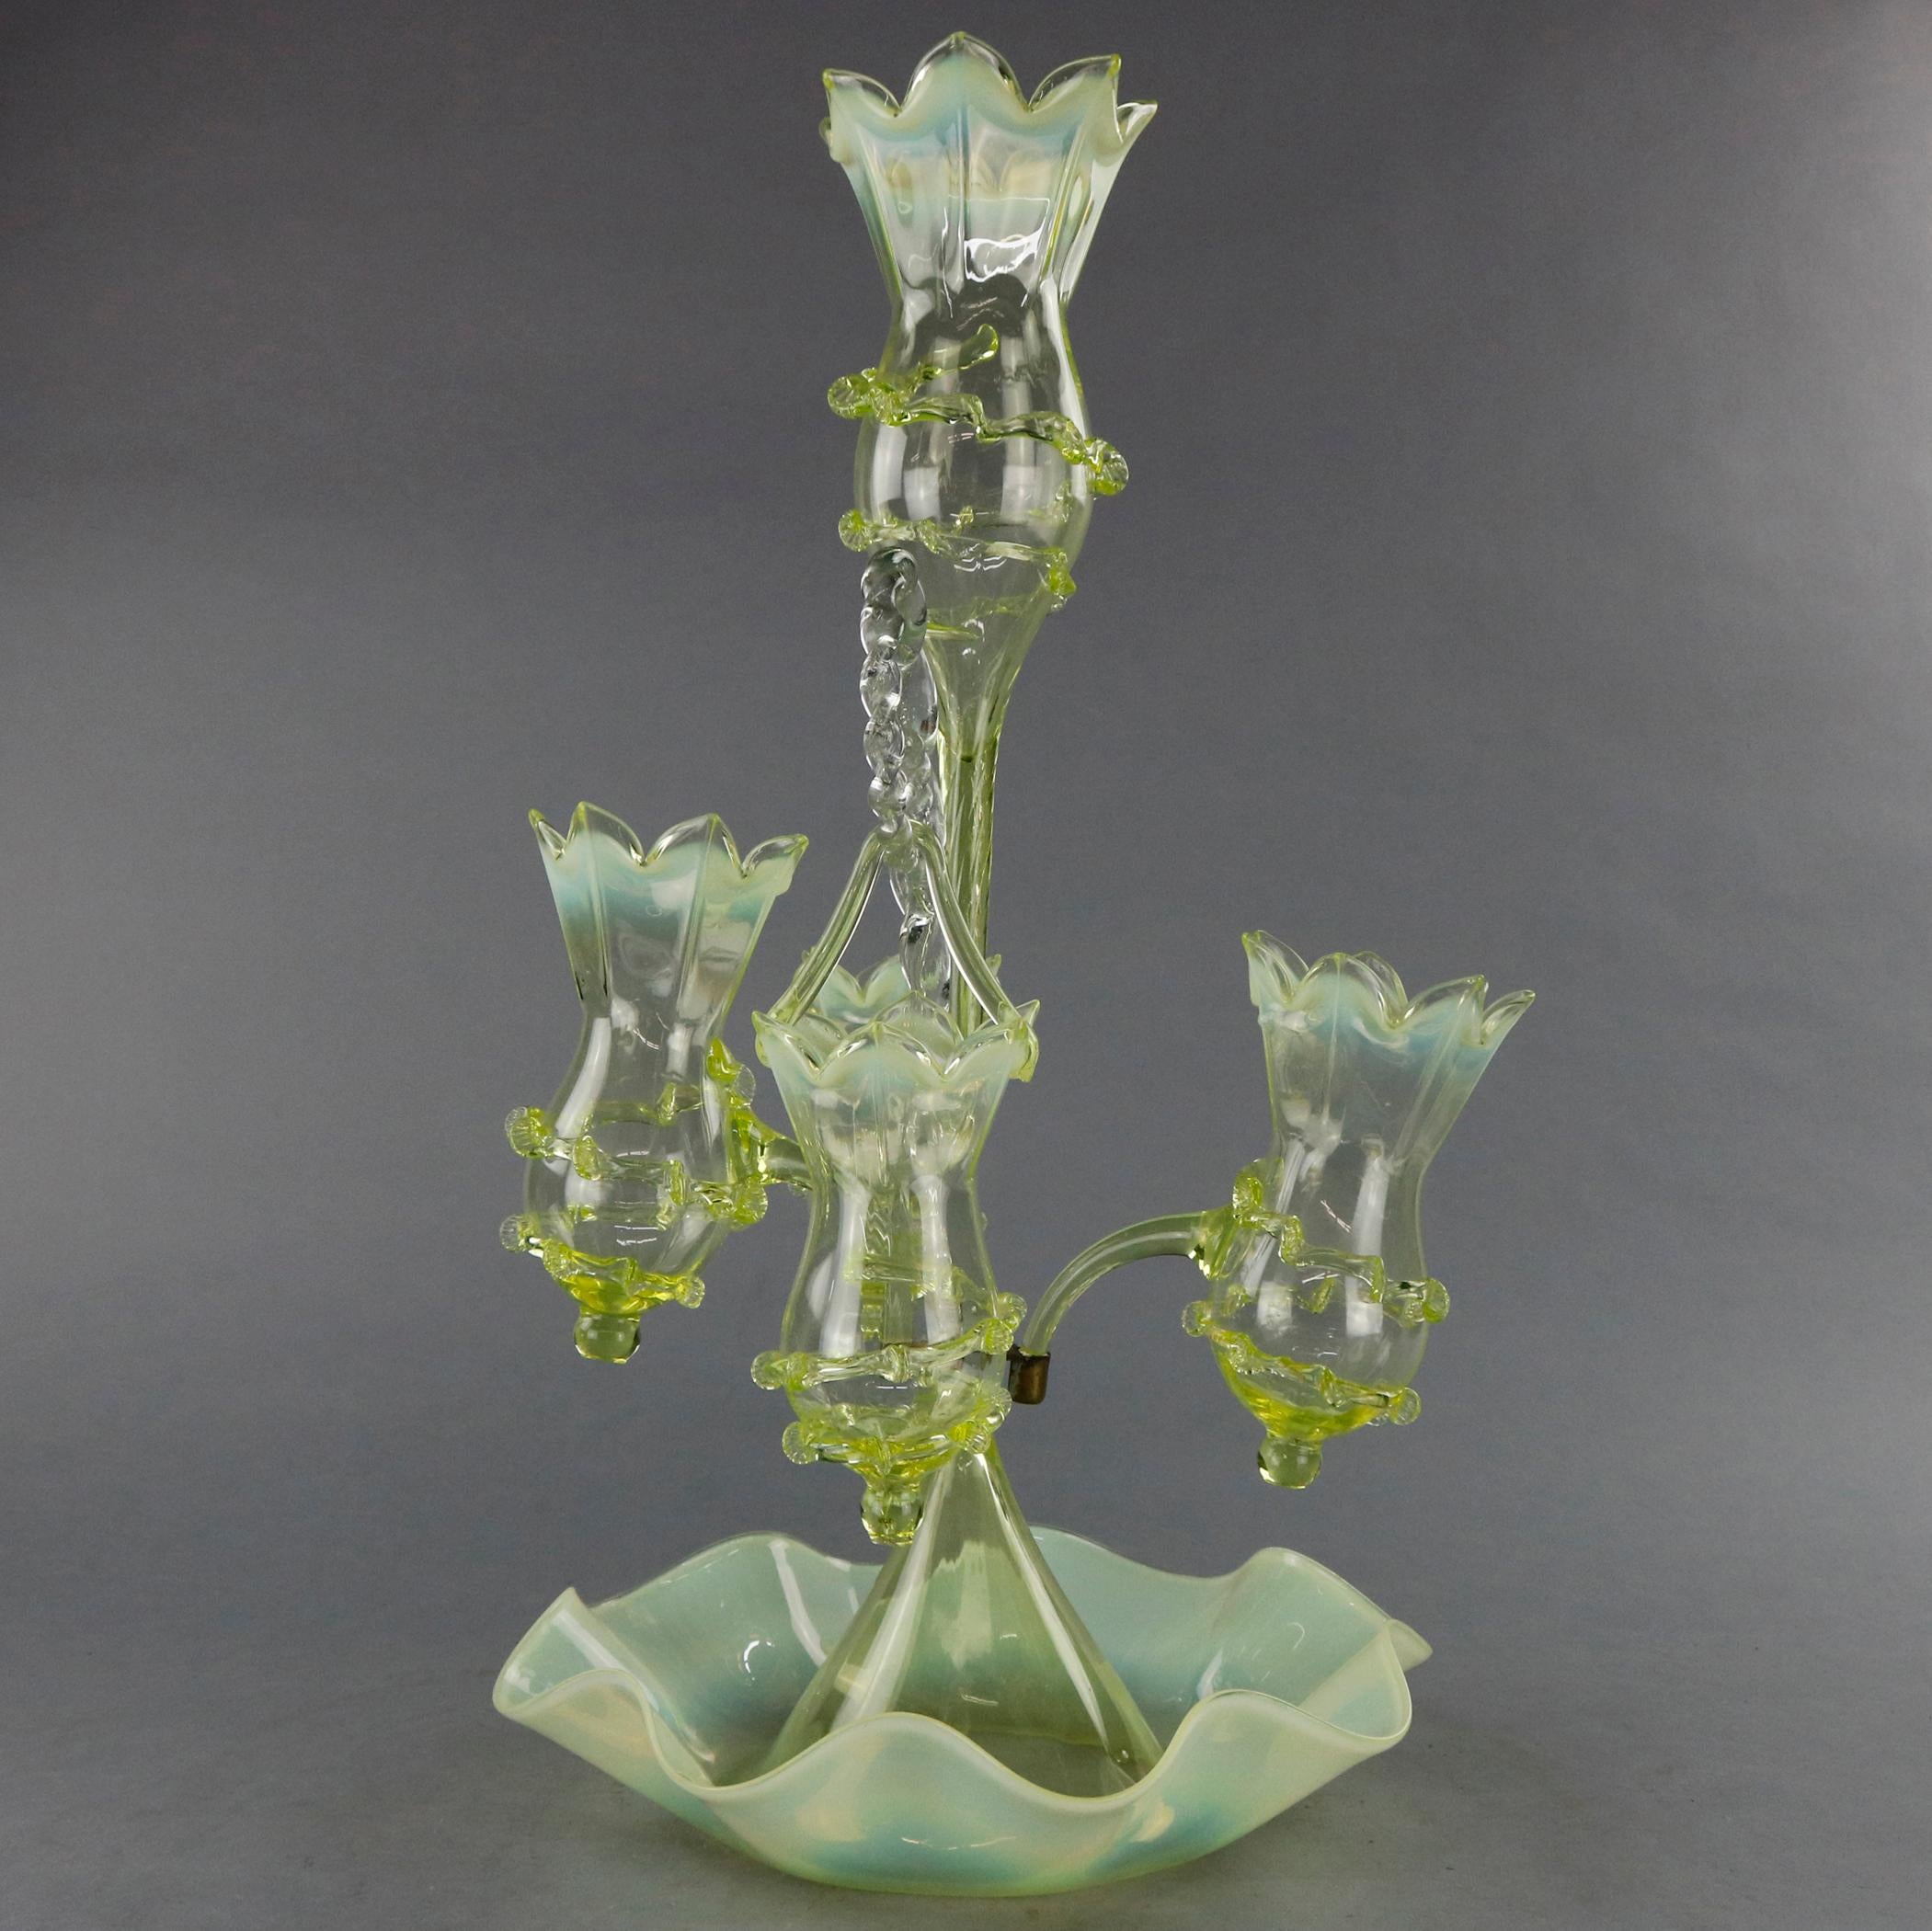 An antique Victorian epergne centerpiece offers vaseline glass construction with floral form hanging and fixed vases (vessels) with applied string decoration on conical base with ruffled rim, circa 1890

Measures: 23.5